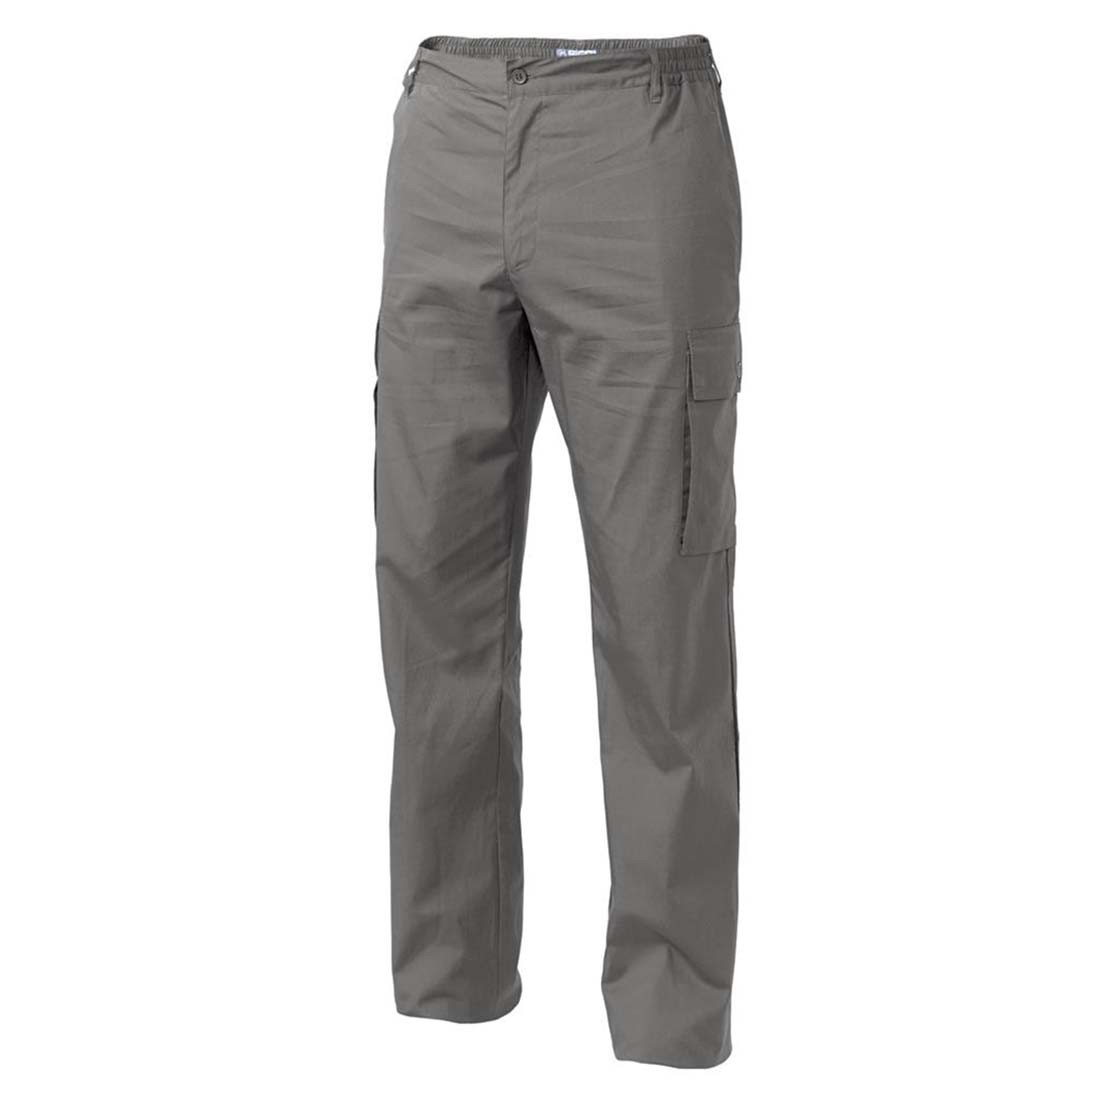 DERBY Chef's Trousers - Safetywear